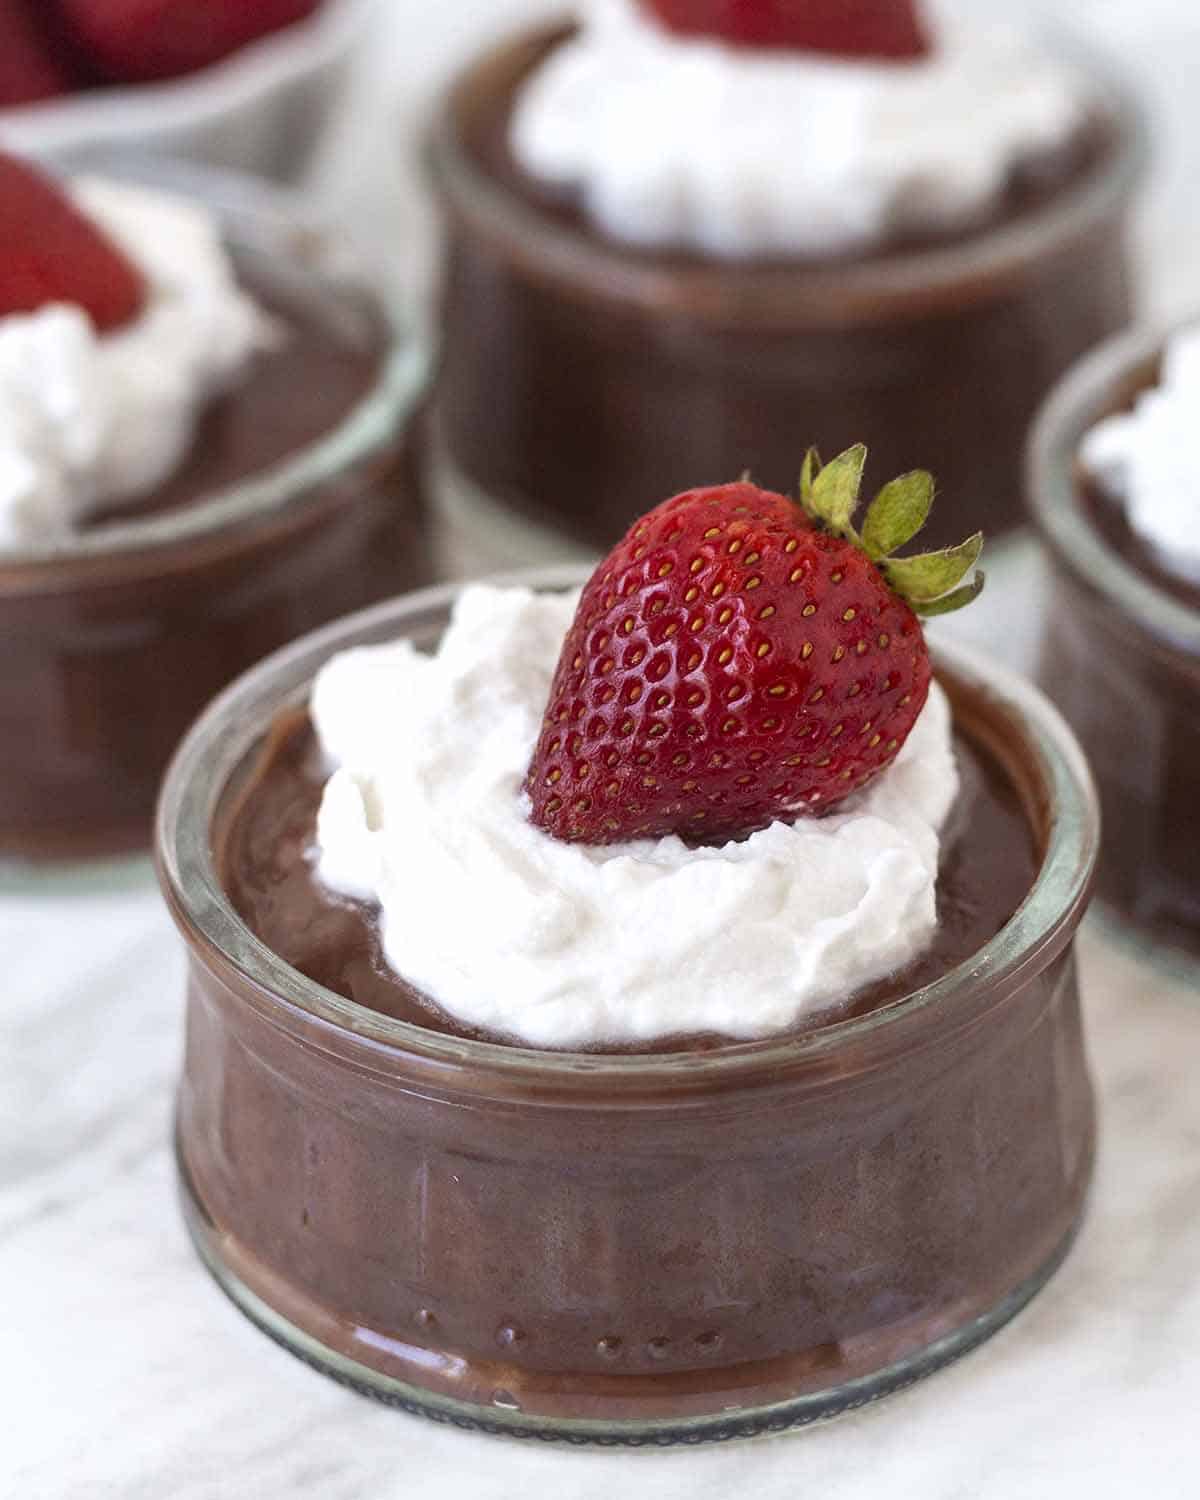 Chocolate pudding in a glass bowl garnished with whipped cream and a fresh strawberry.